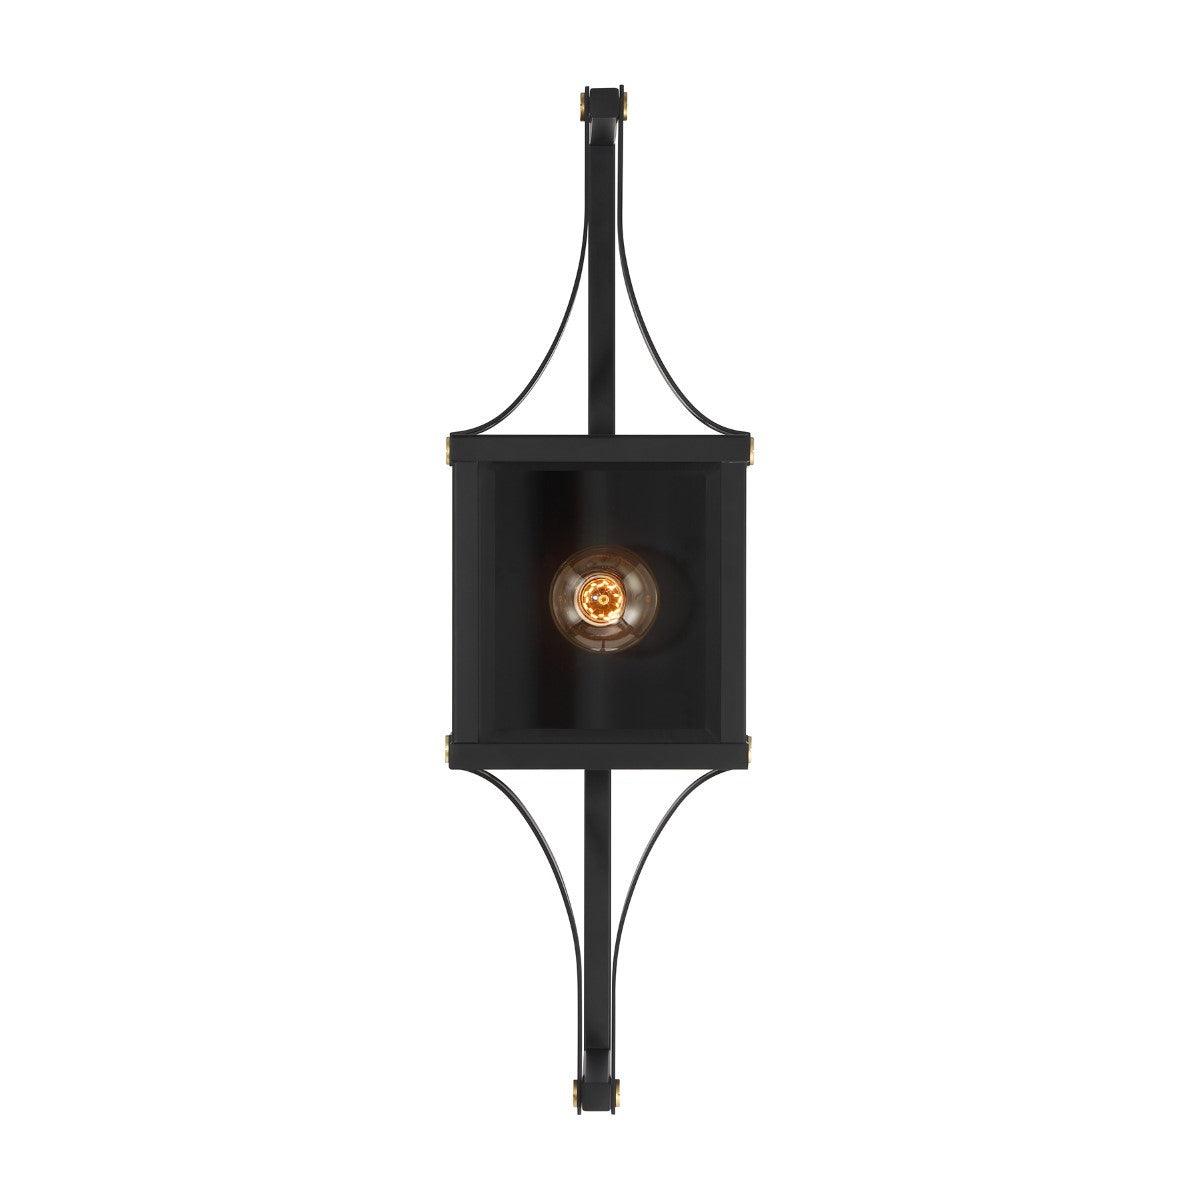 Raeburn 28 in. Outdoor Wall Lantern Matte Black and Weathered Brushed Brass Finish